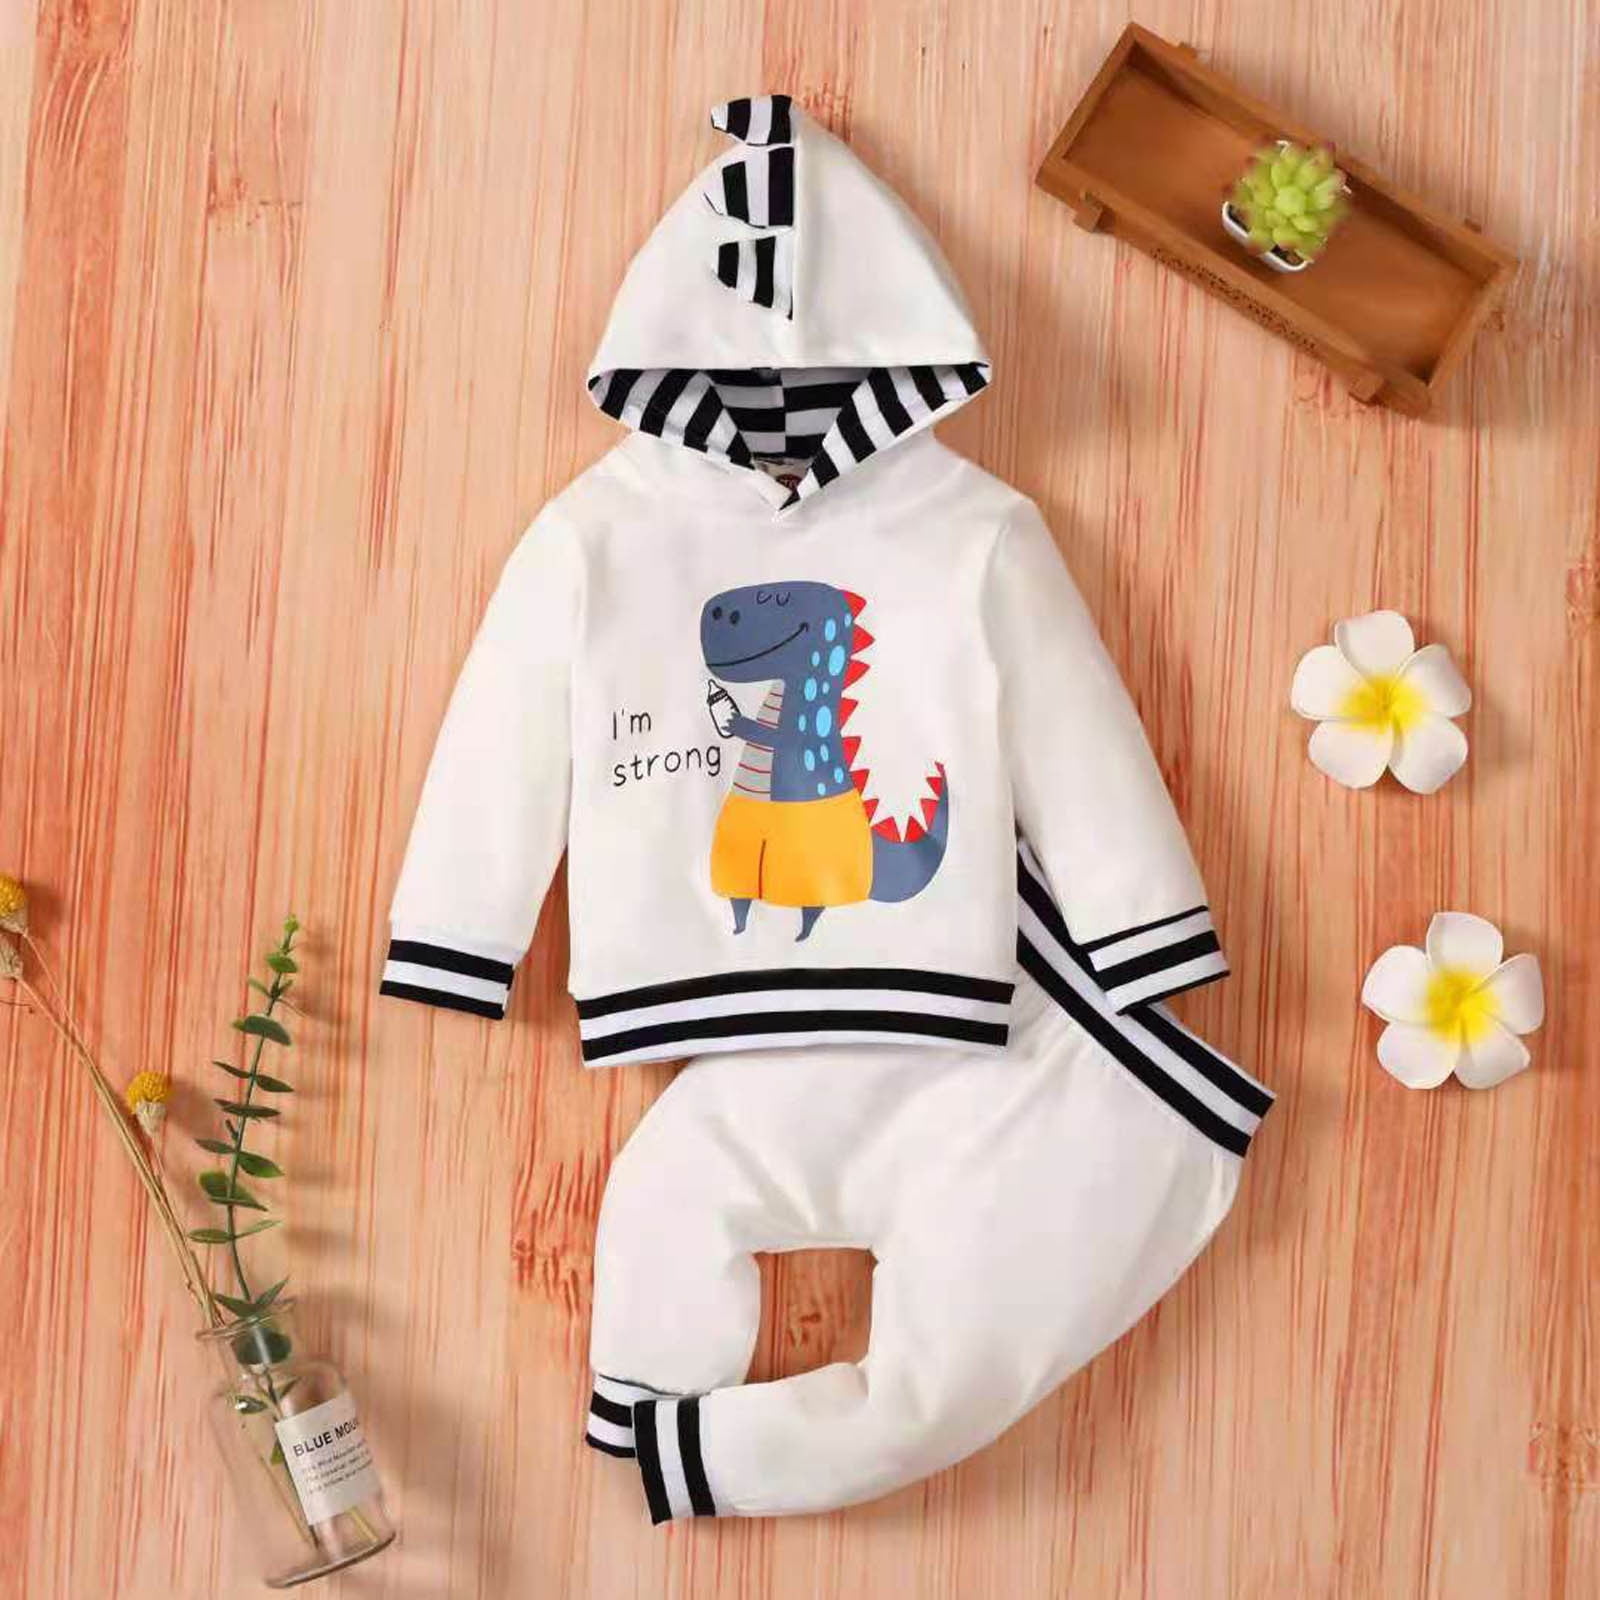 Newborn Infant Baby Boy Girl Clothes Floral Stripe Hoodie Tops+Pants Outfits Set